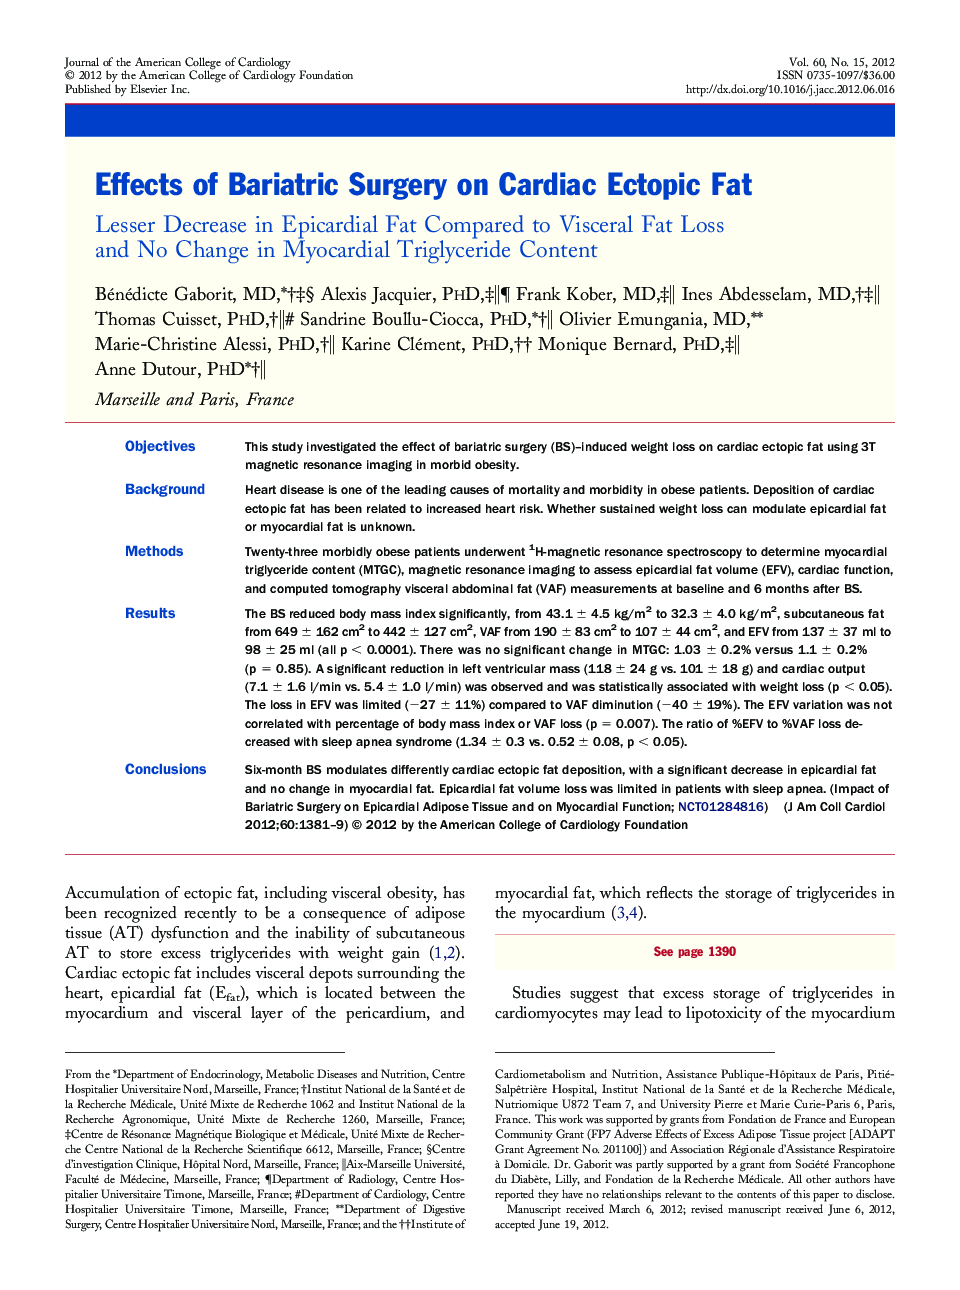 Effects of Bariatric Surgery on Cardiac Ectopic Fat : Lesser Decrease in Epicardial Fat Compared to Visceral Fat Loss and No Change in Myocardial Triglyceride Content